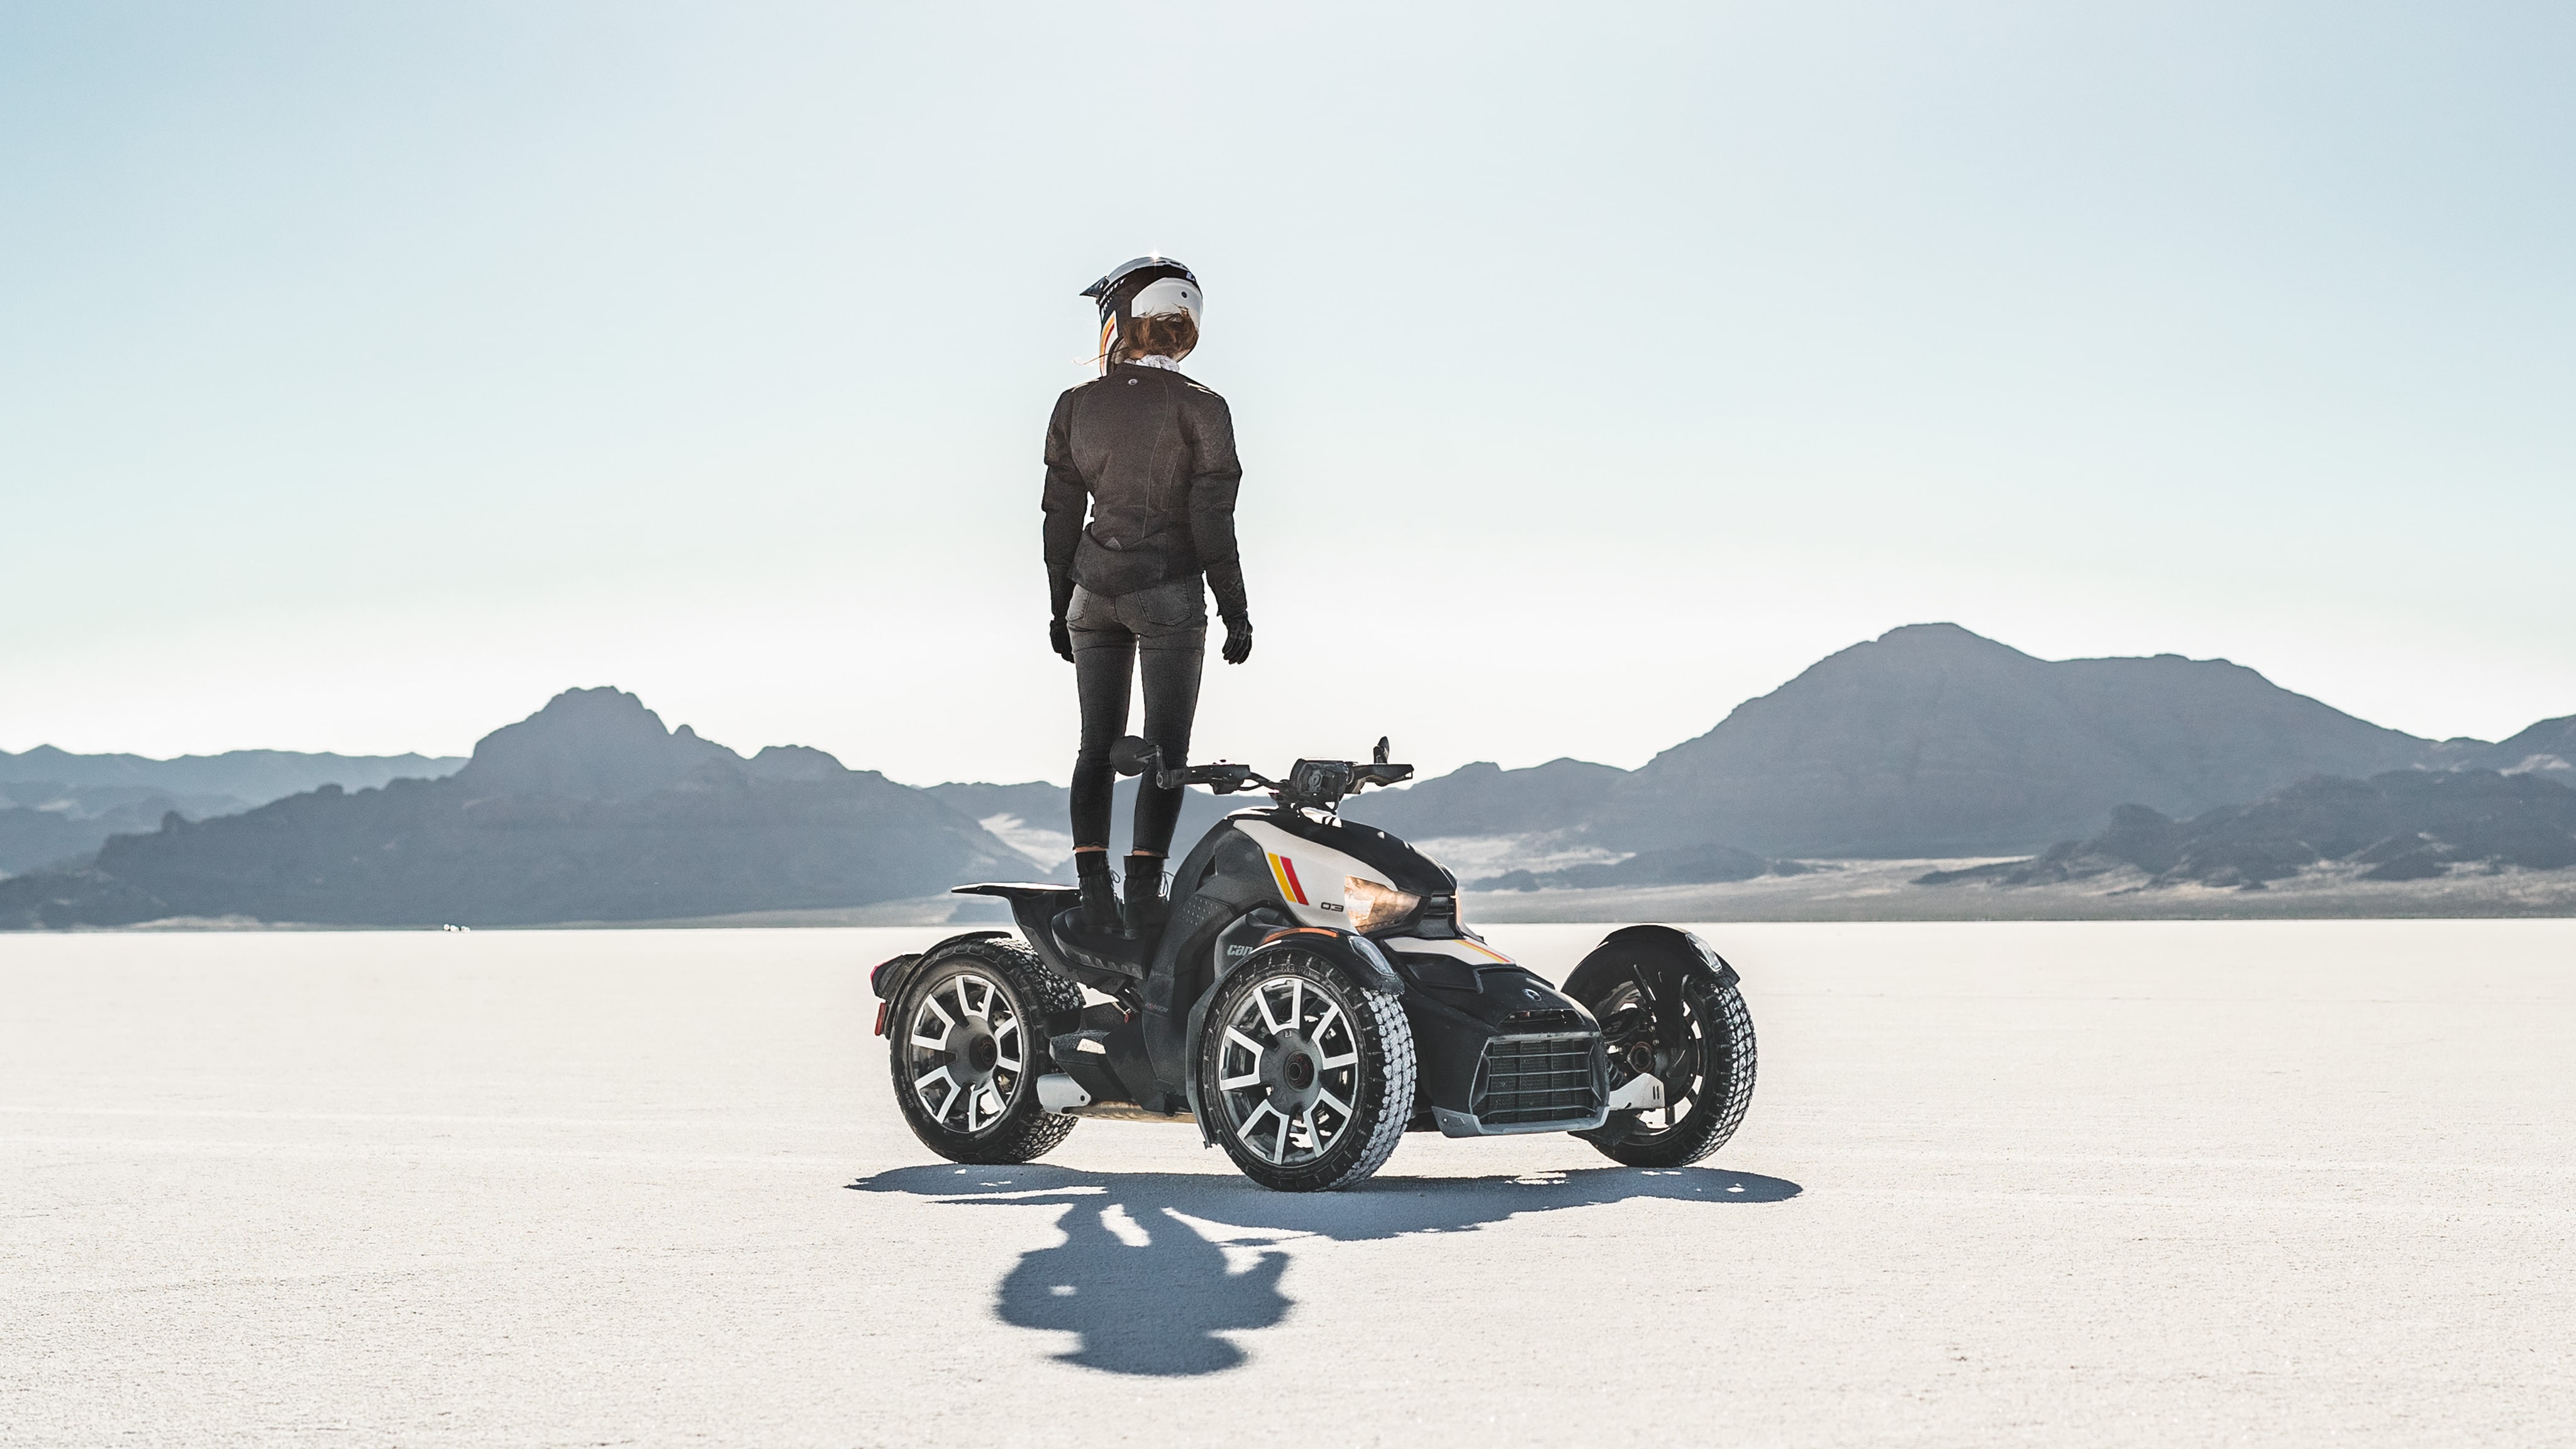 A rider standing on the seat of their Can-Am On-Road vehicle